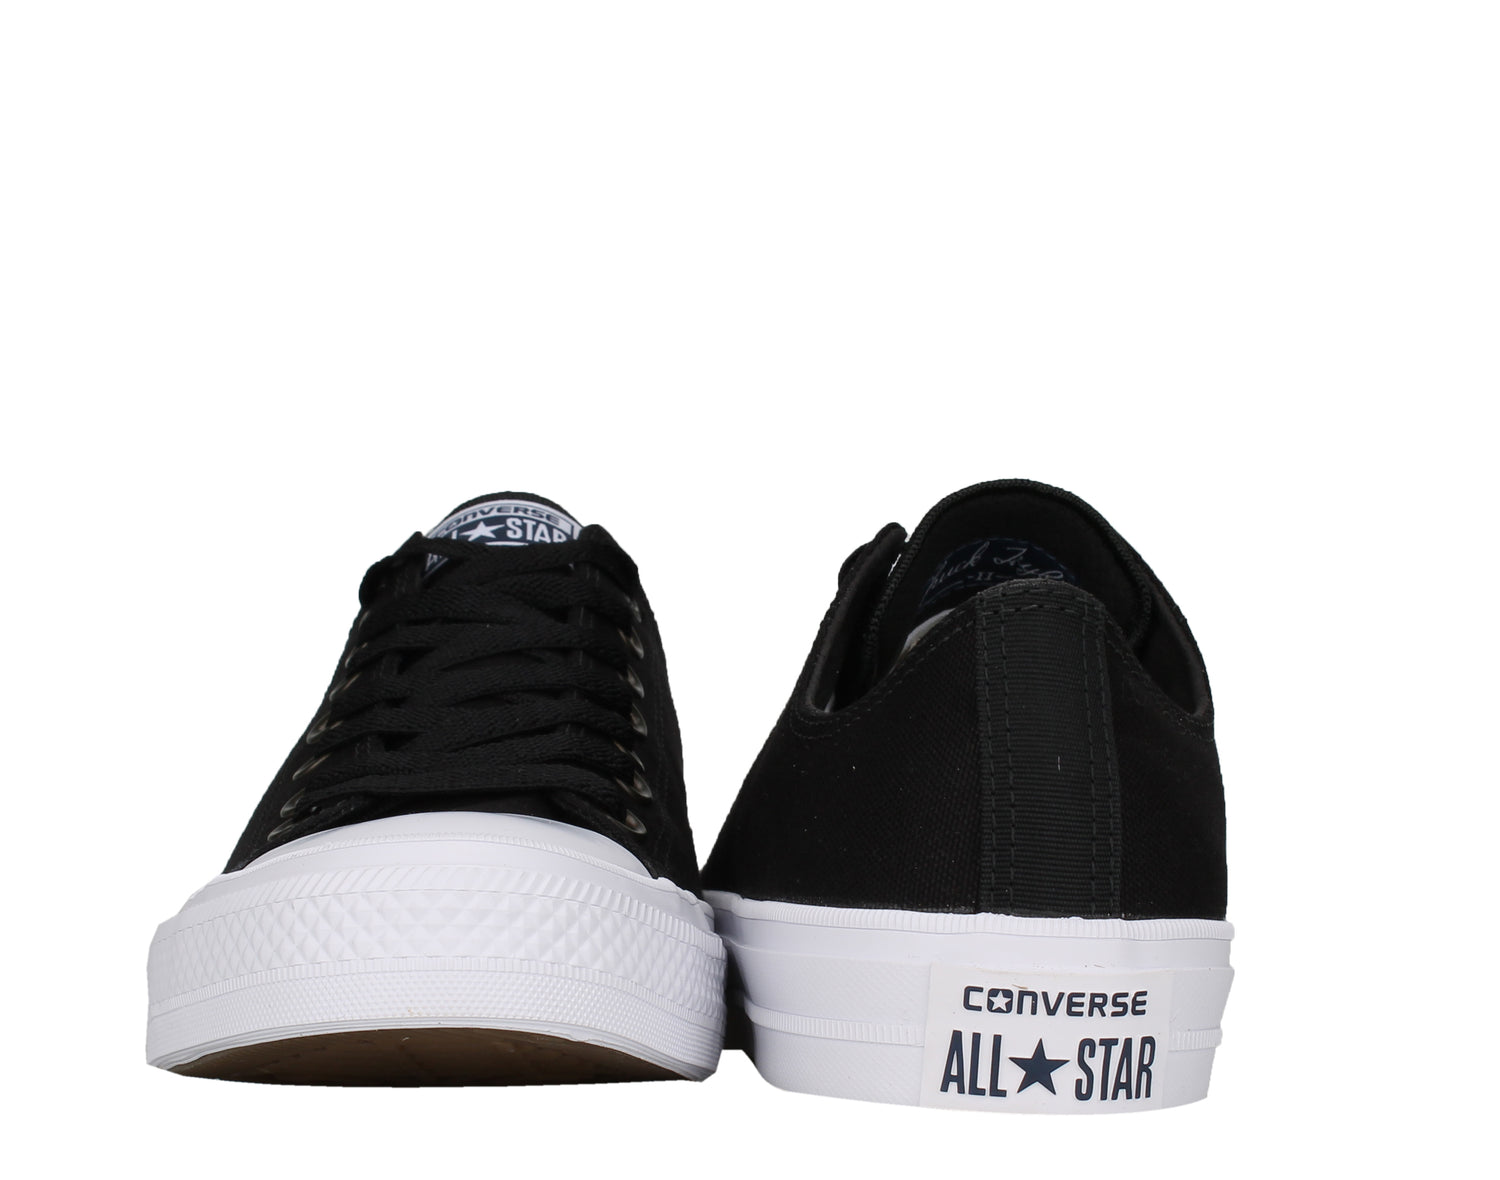 Converse Chuck Taylor All Star II Low Top